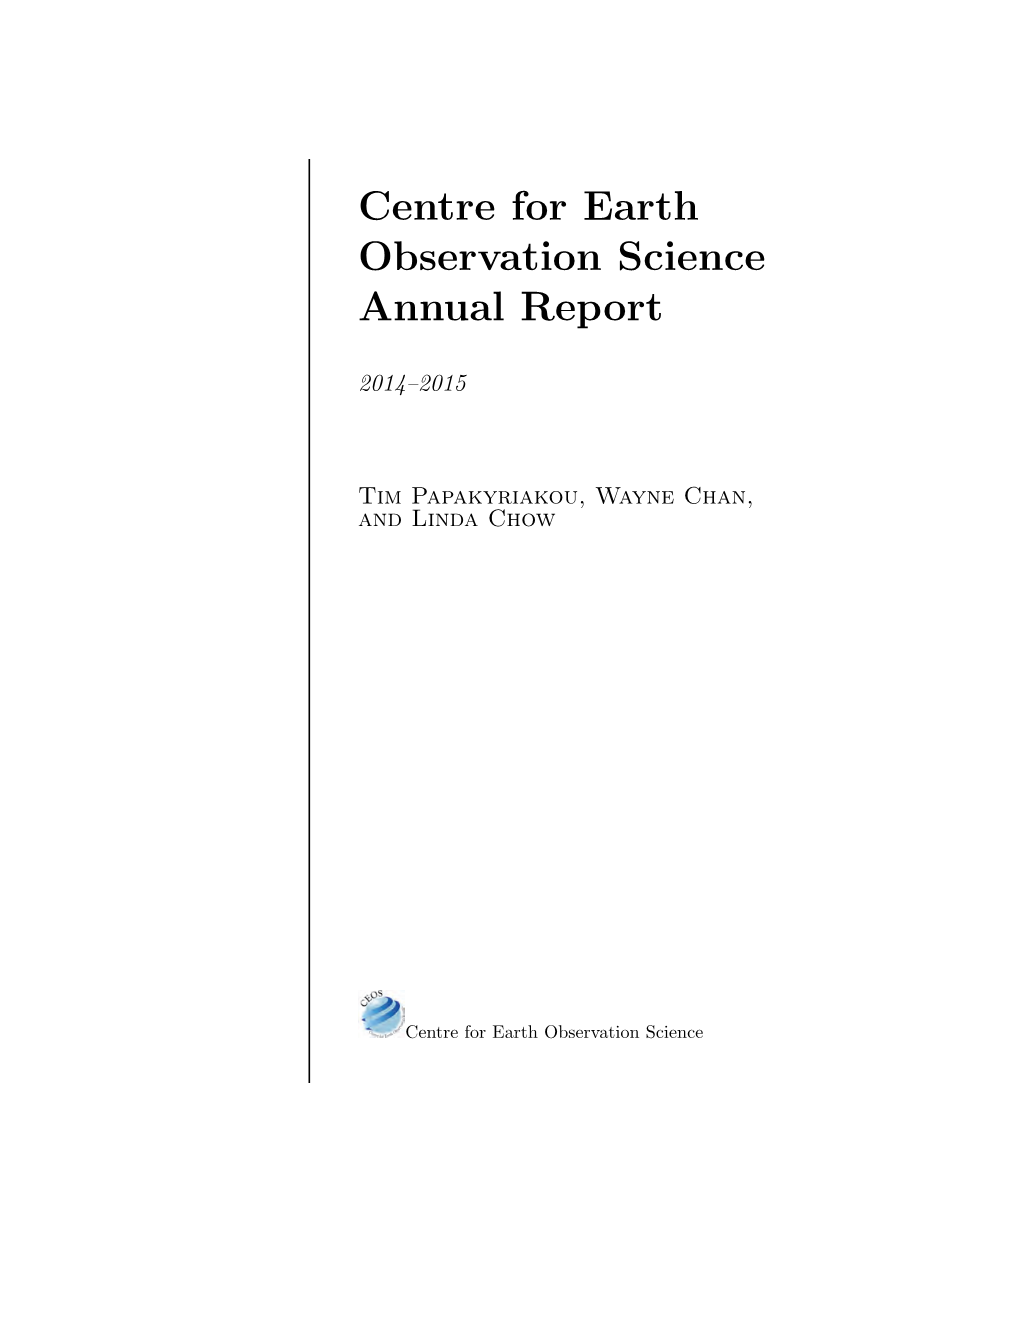 Centre for Earth Observation Science Annual Report